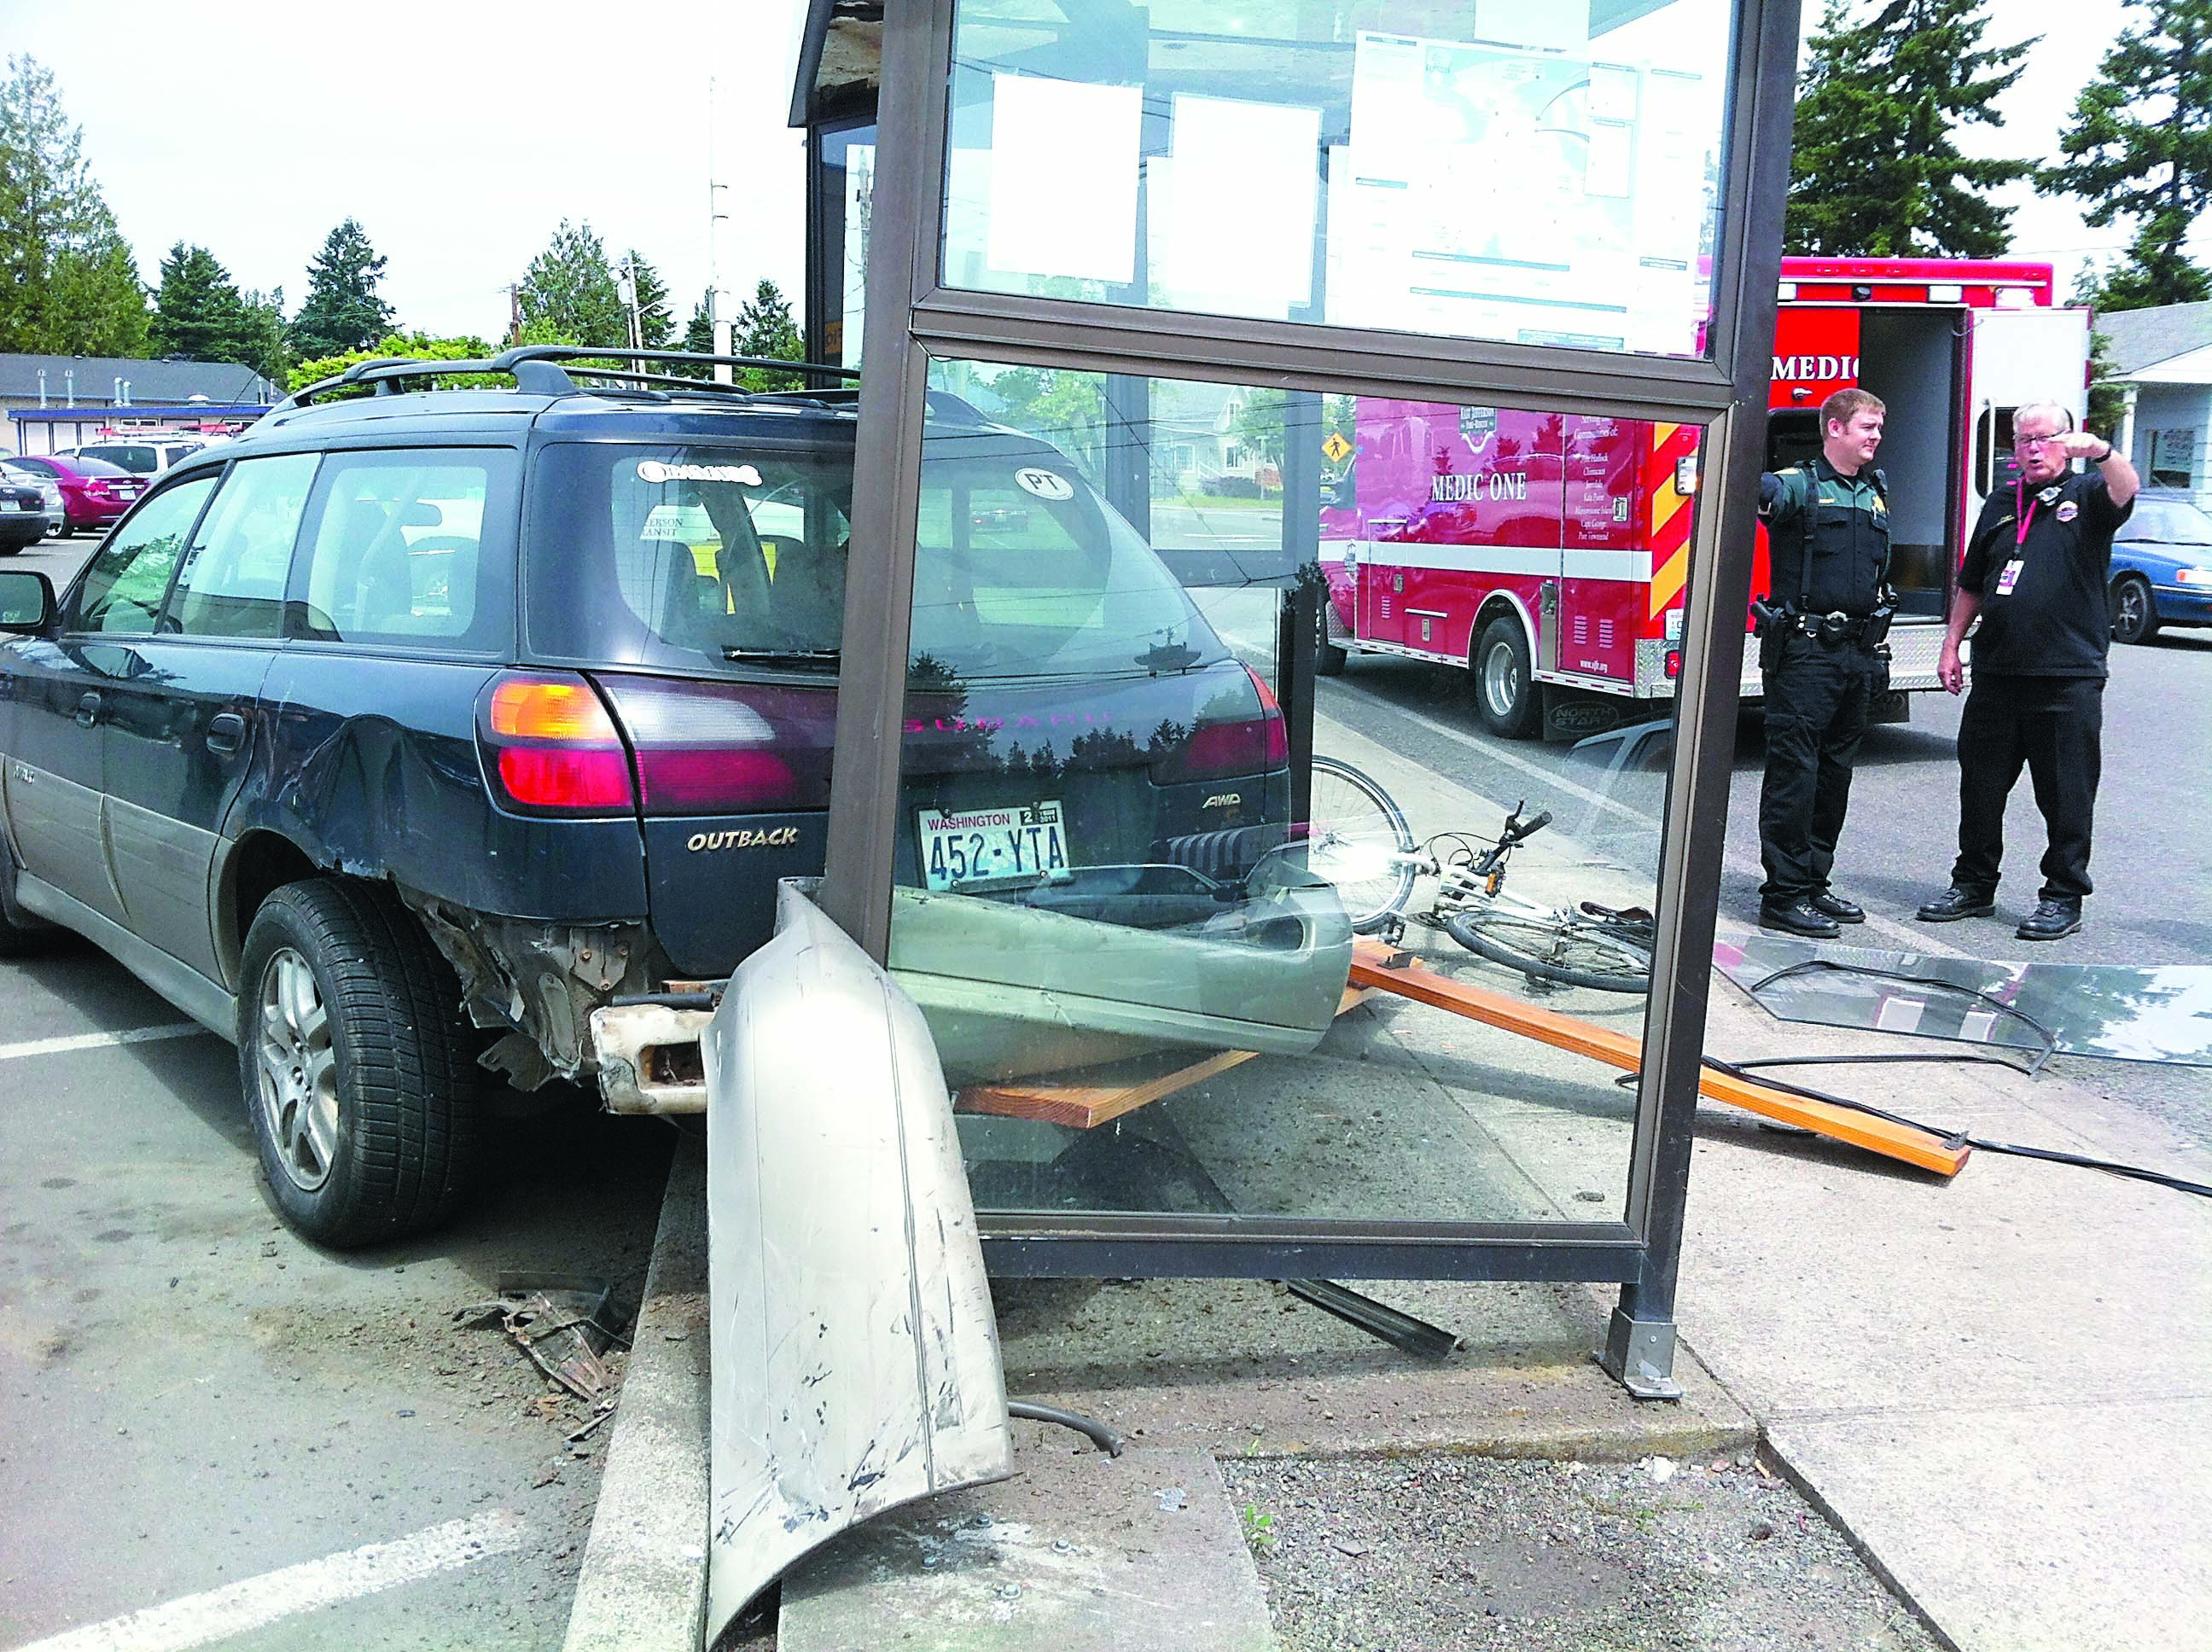 One person was taken to a hospital after a car was pushed into a Jefferson Transit bus stop in Port Hadlock on Thursday. Crystal Craig/East Jefferson County Fire-Rescue